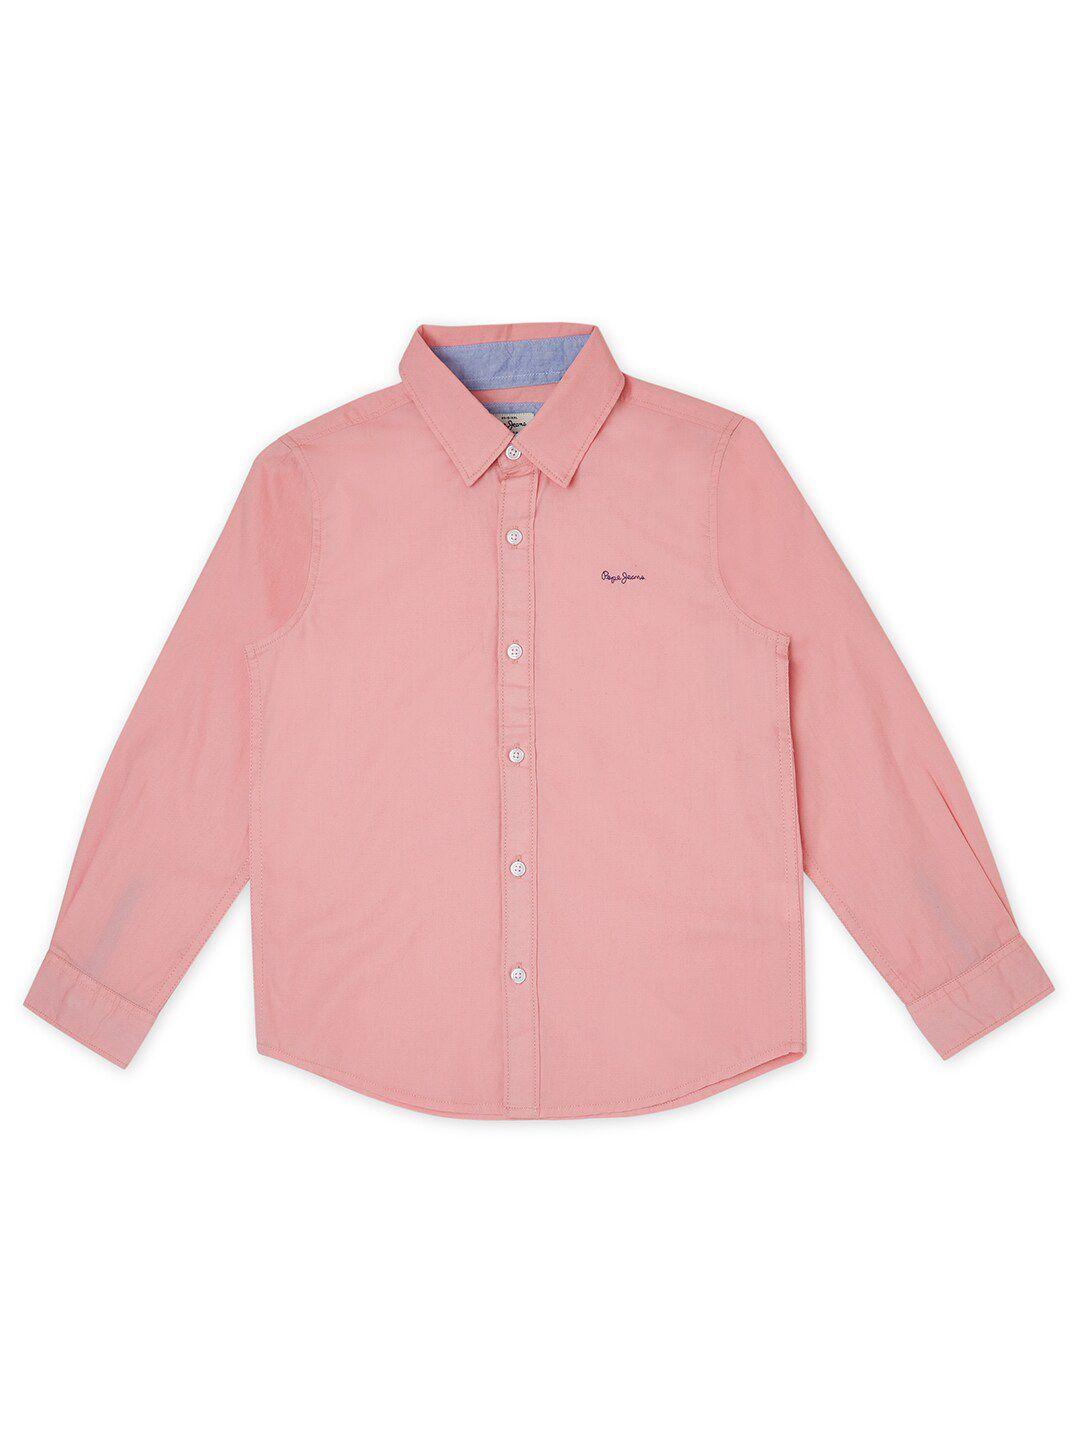 pepe jeans boys pink casual shirt